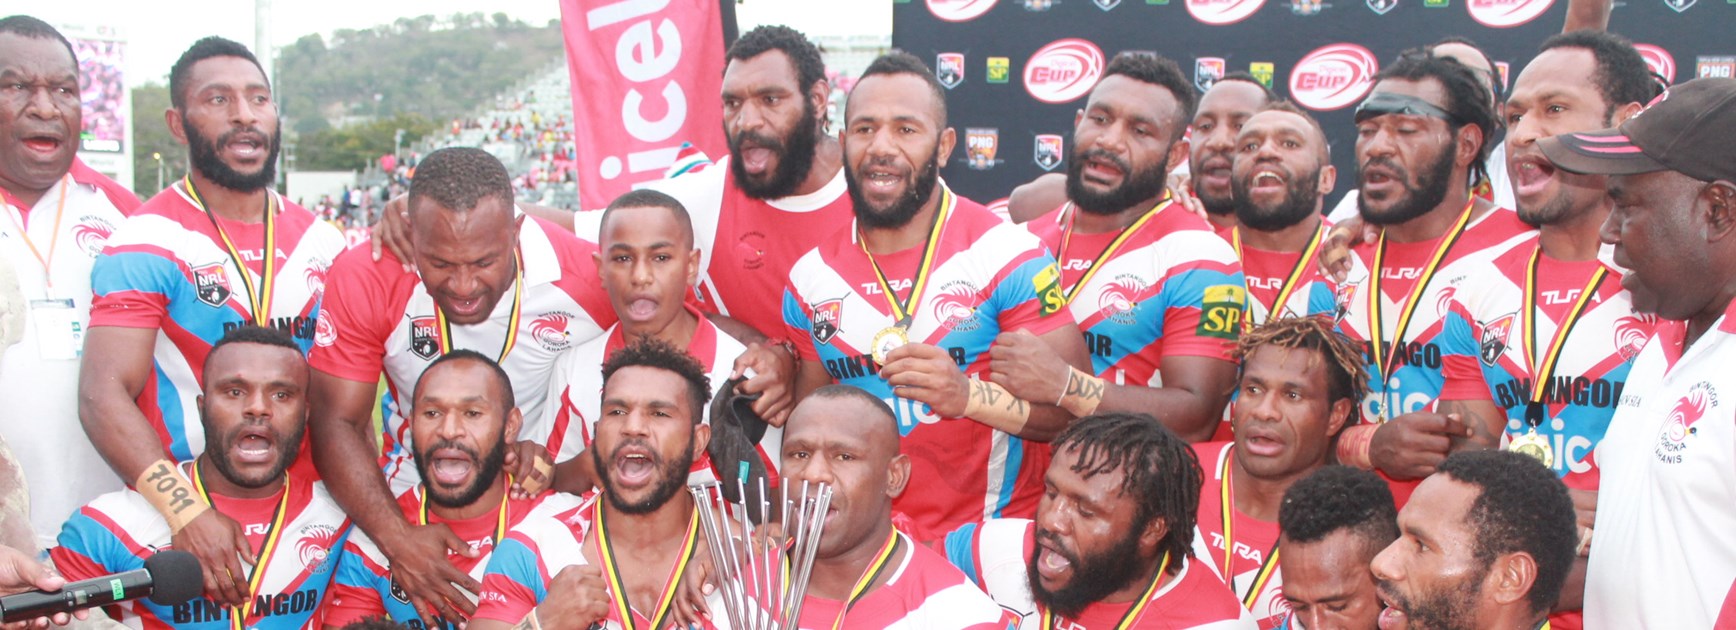 Digicel Cup competition expands in 2019 season